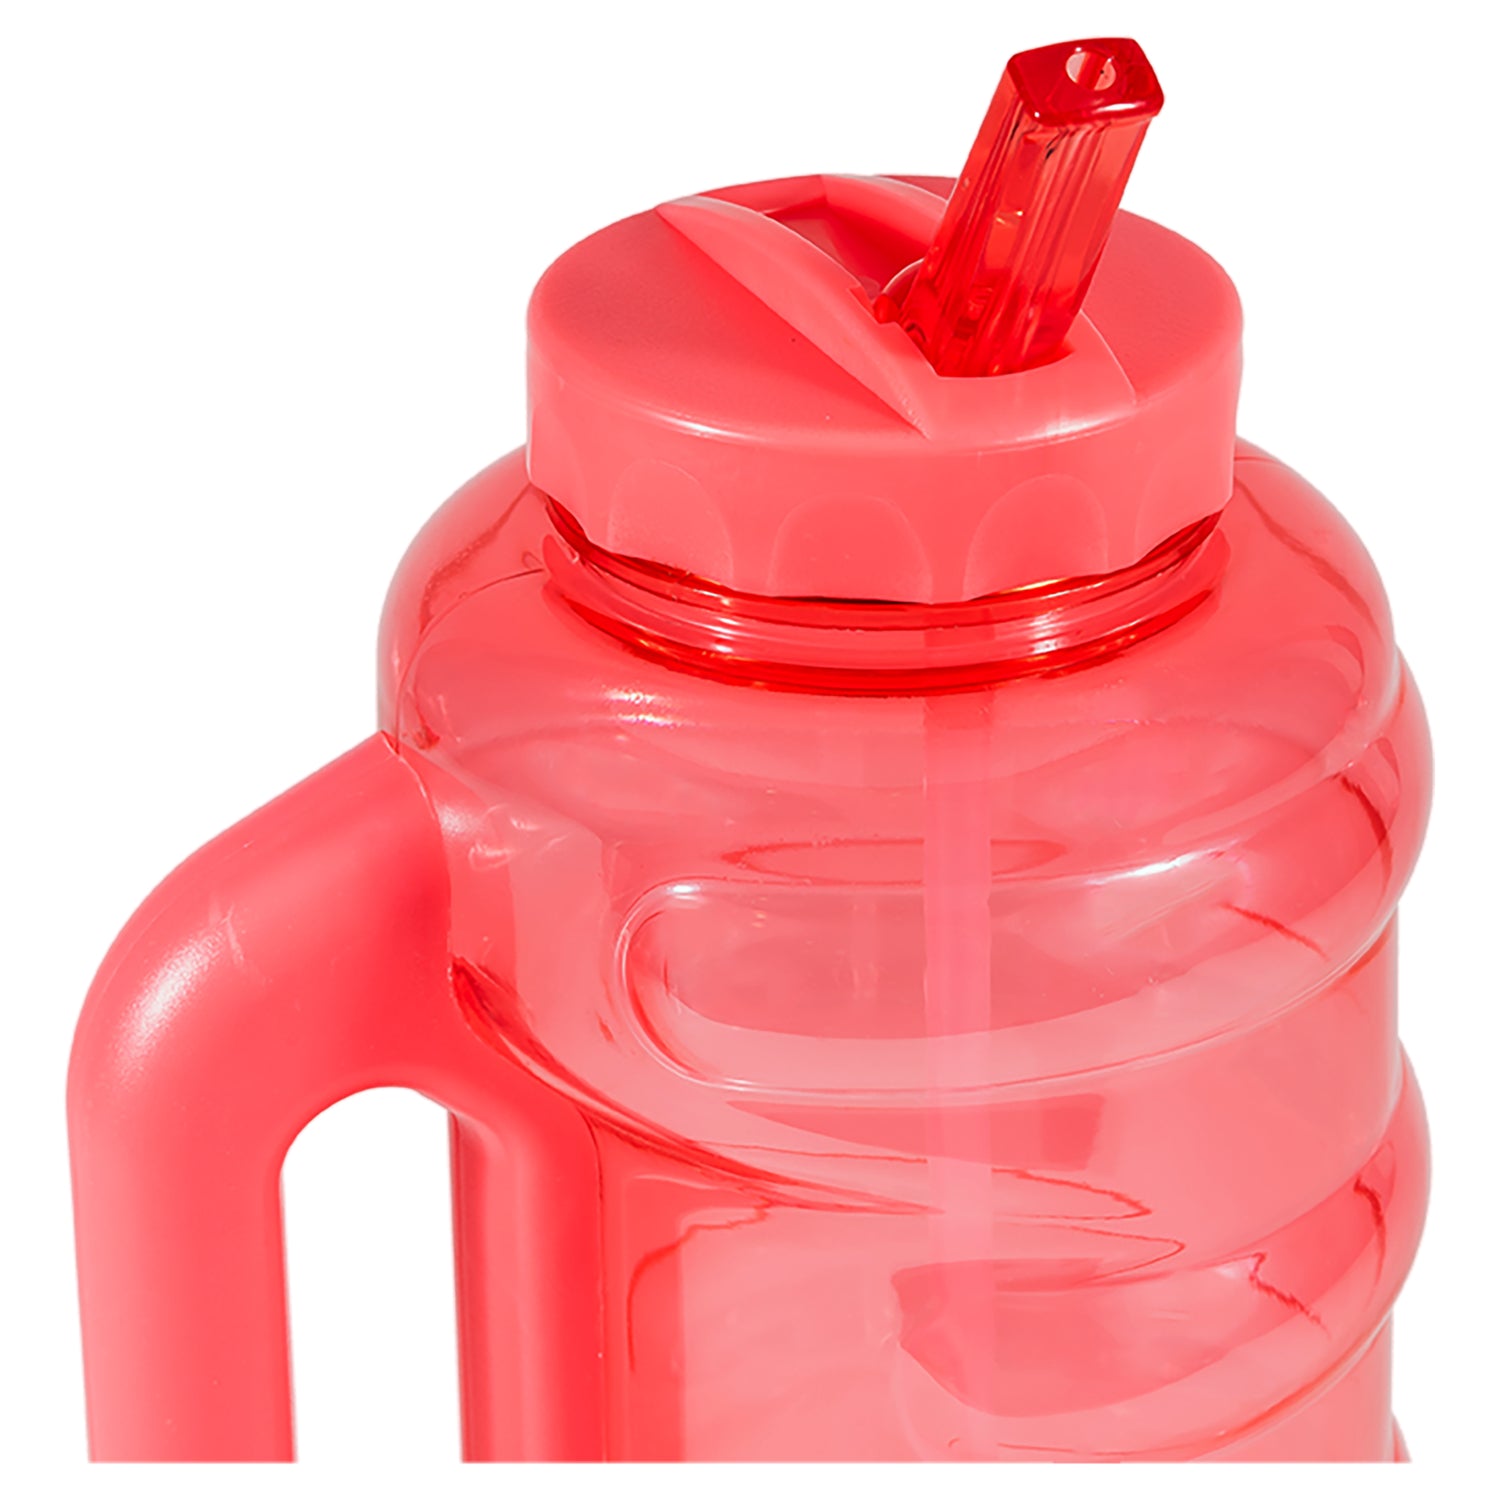 New! Cool Gear- 80oz- EZ Freeze Water Bottle with Handle Ice Pack / color  pink